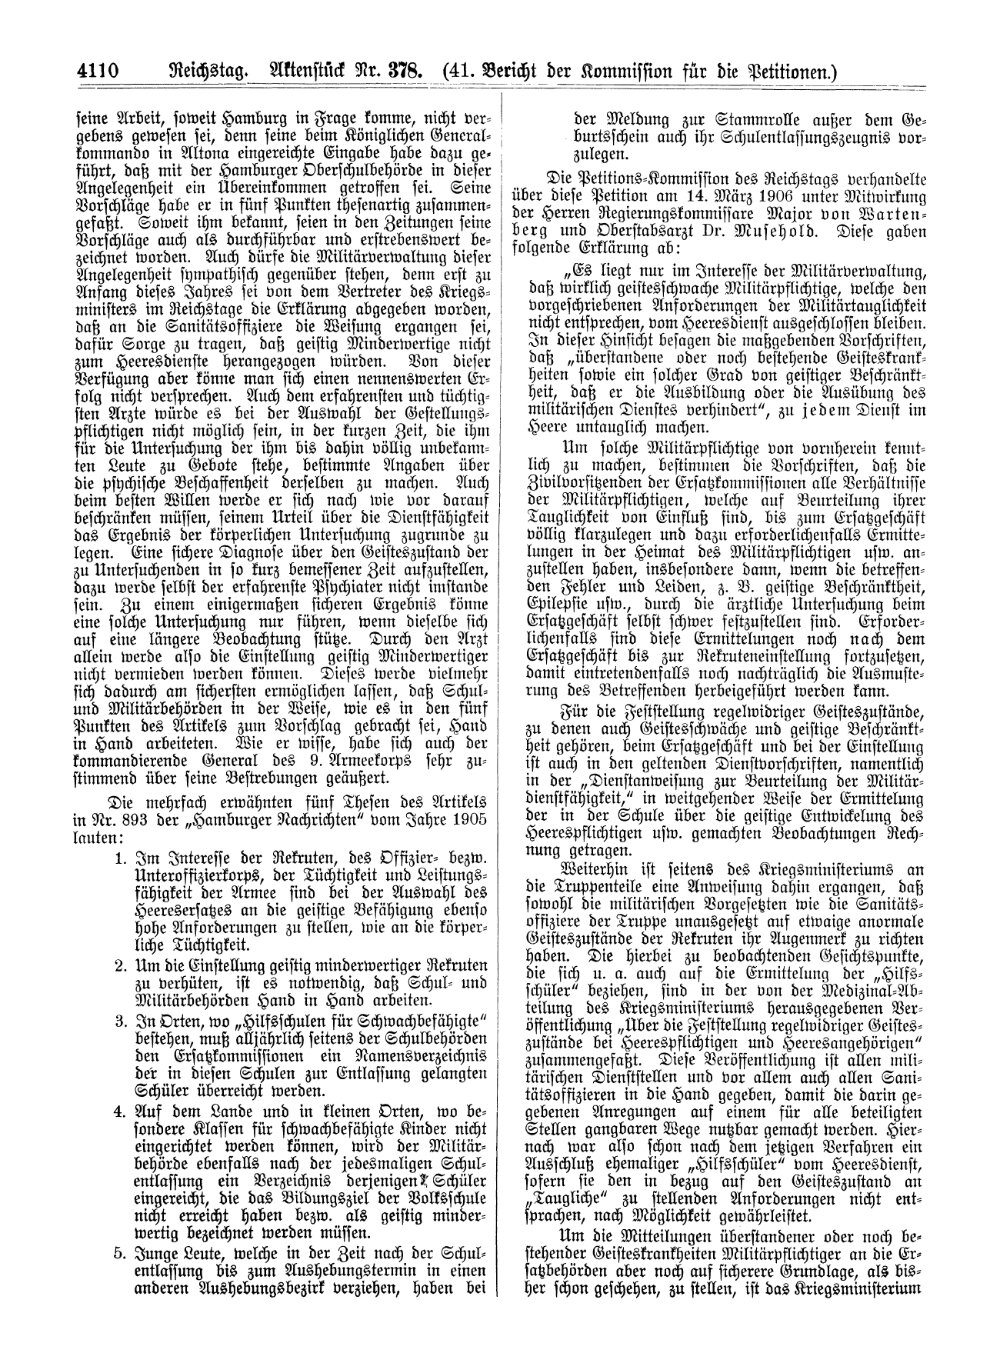 Scan of page 4110